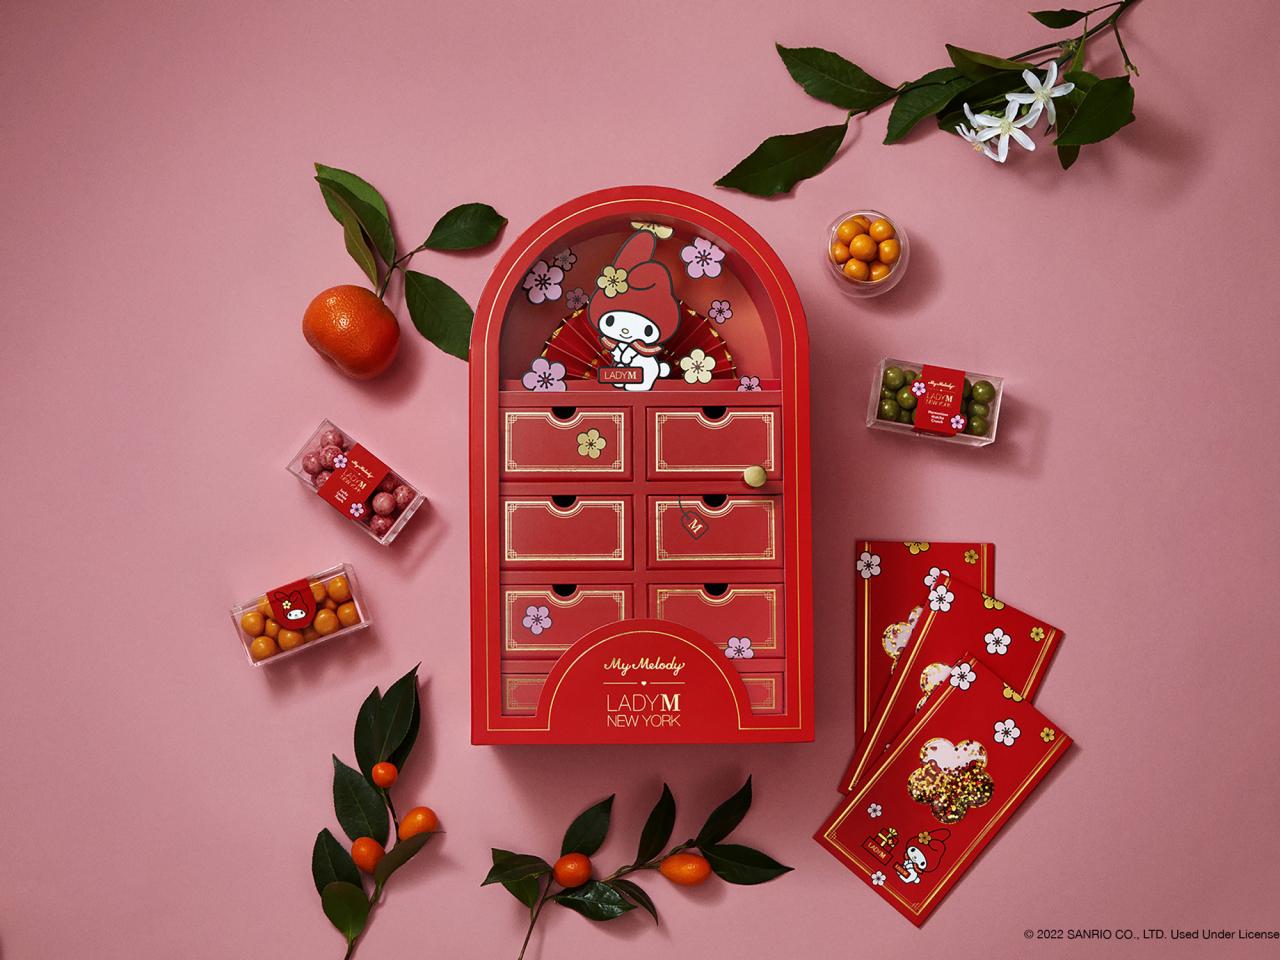 Lunar New Year Food Gifts FN Dish BehindtheScenes, Food Trends